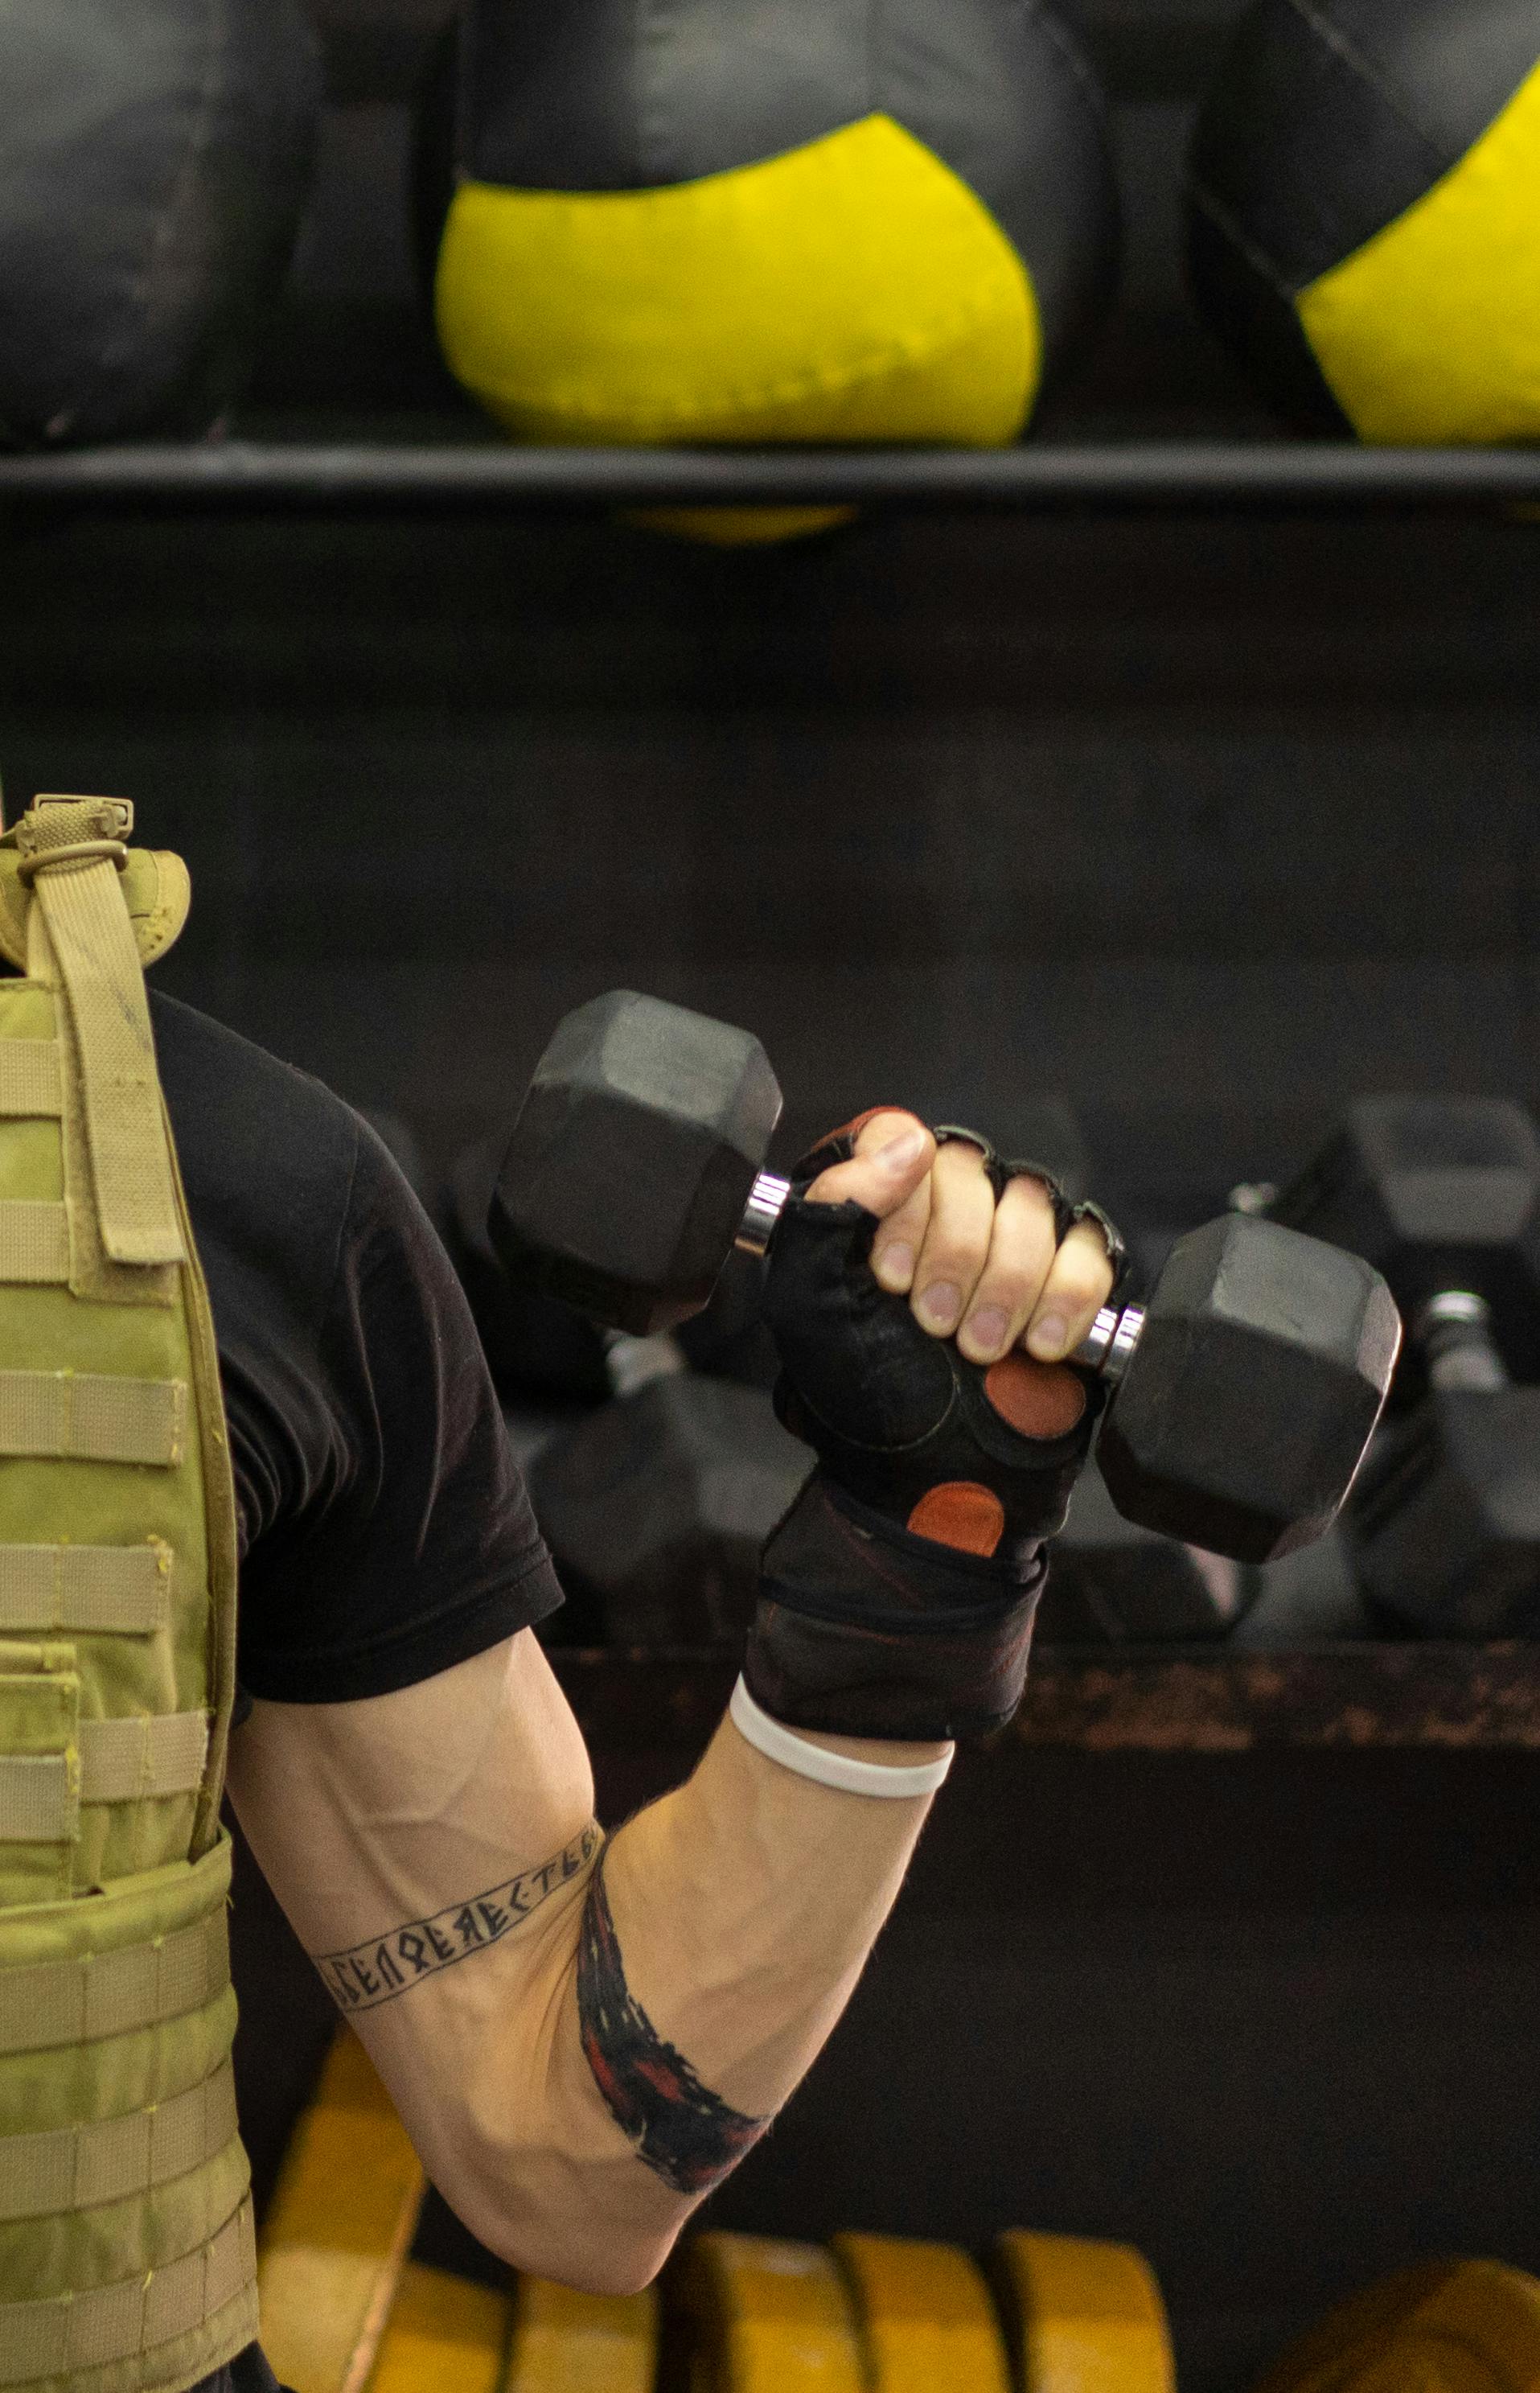 A Man Lifting Dumbbell while Wearing Virtual Goggles · Free Stock